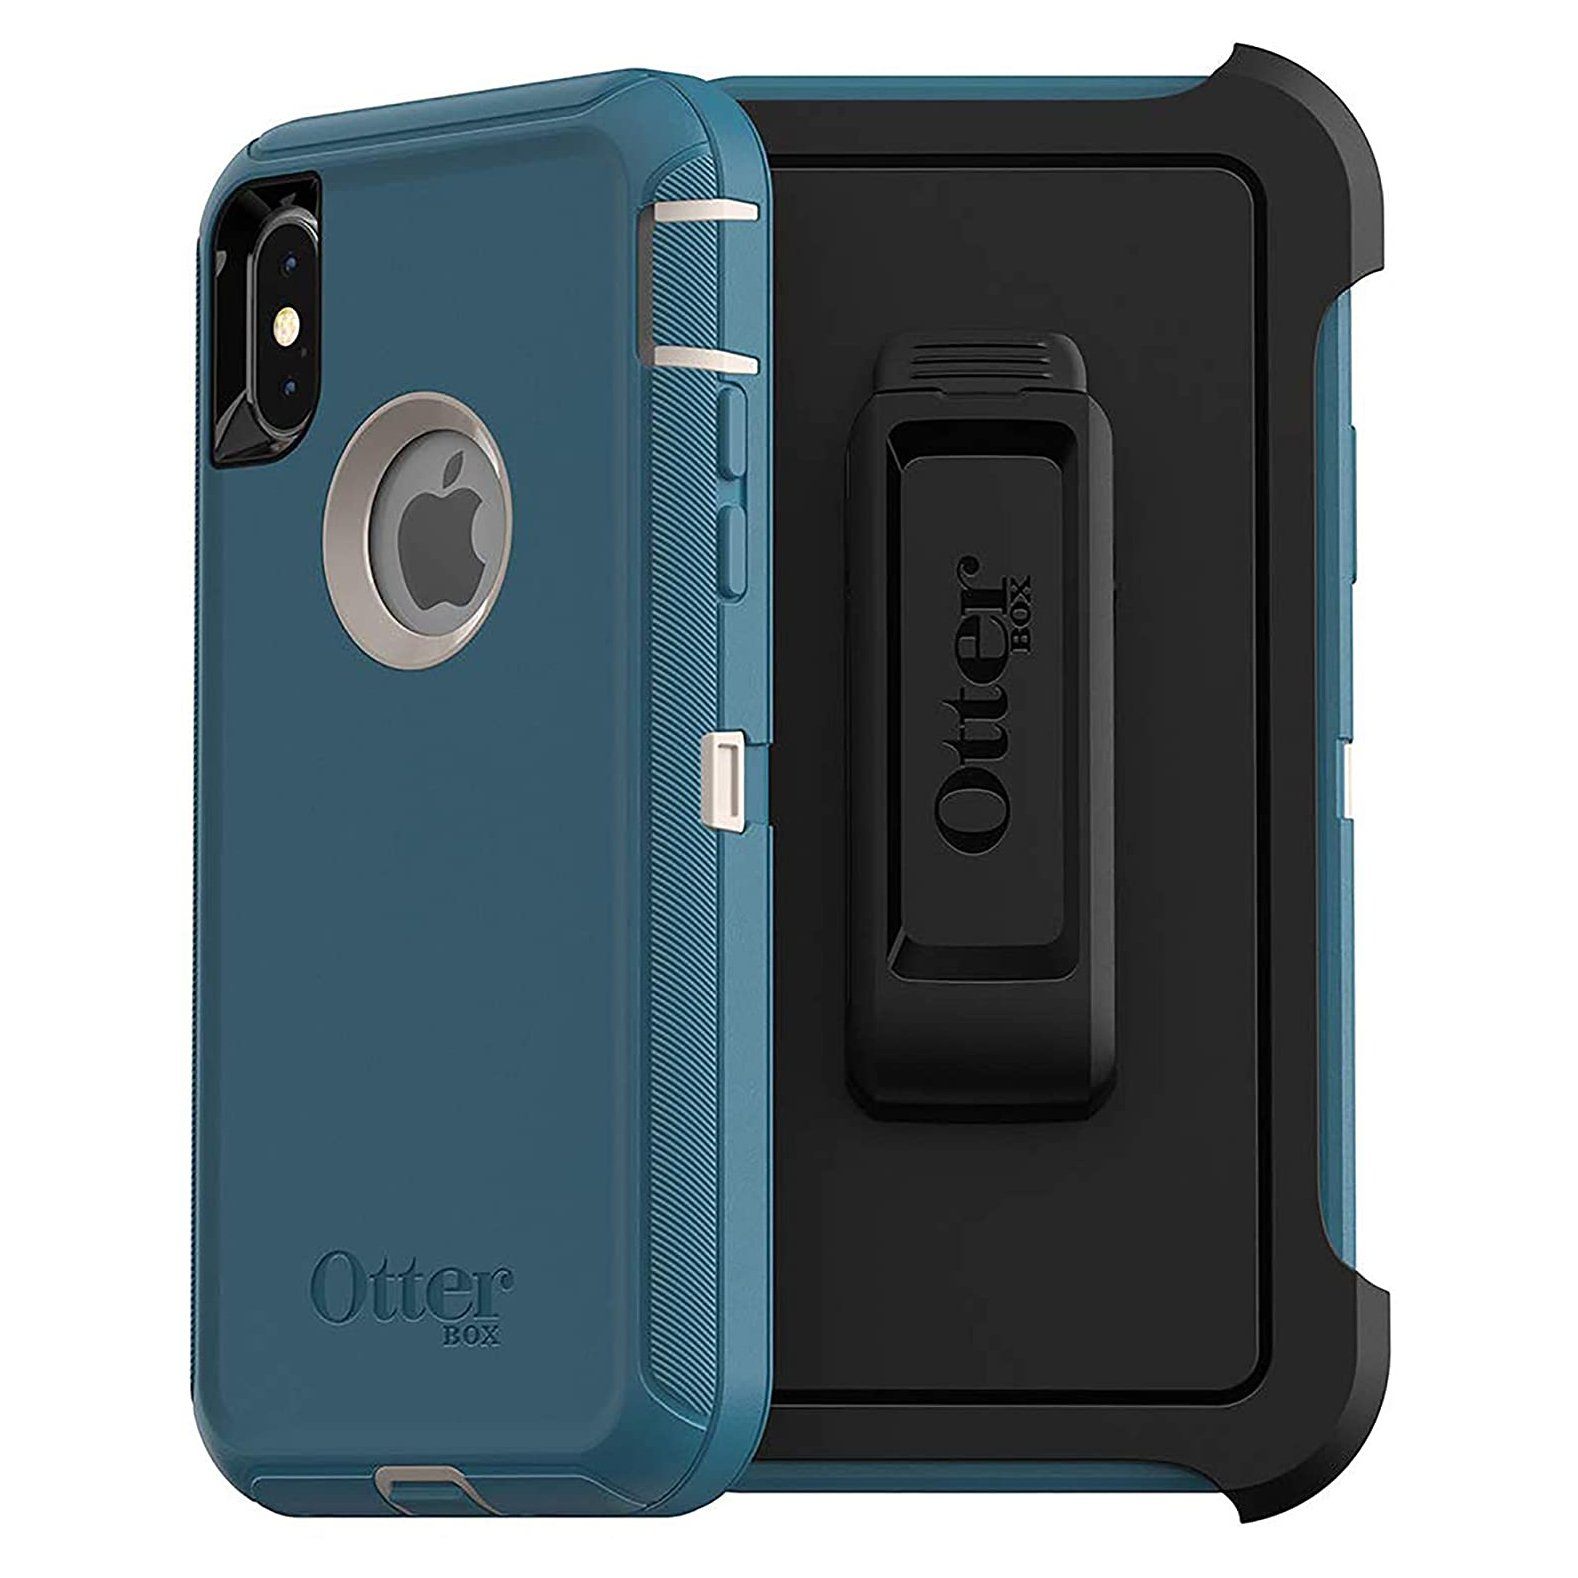 OtterBox Defender Series Case for iPhone Xs &amp; iPhone X